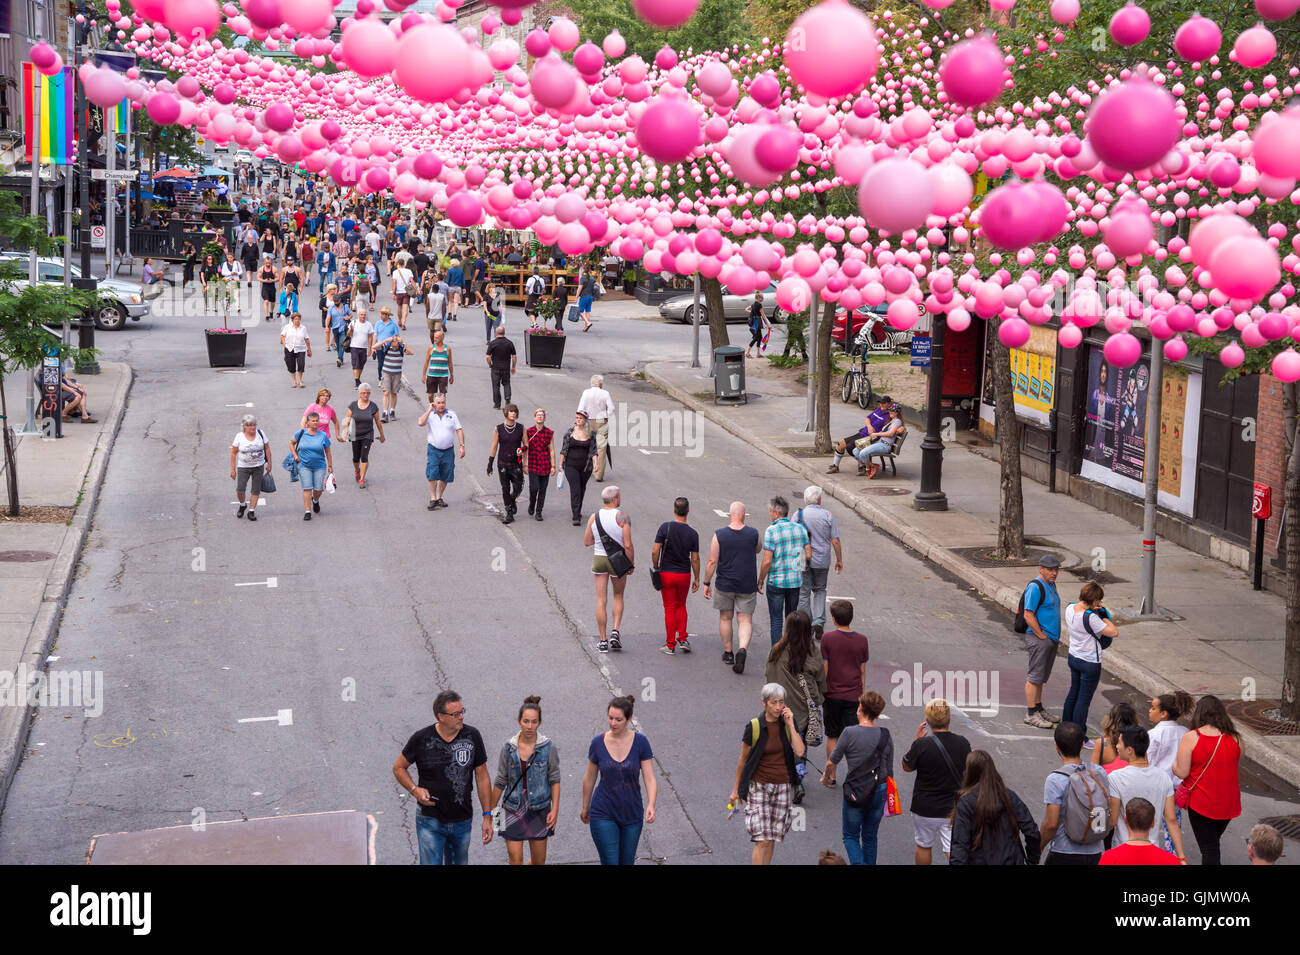 Montreal, CA - 14 August 2016: Pink balls across Rue Sainte Catherine in the Gay Village of Montreal with gay rainbow flags and Stock Photo